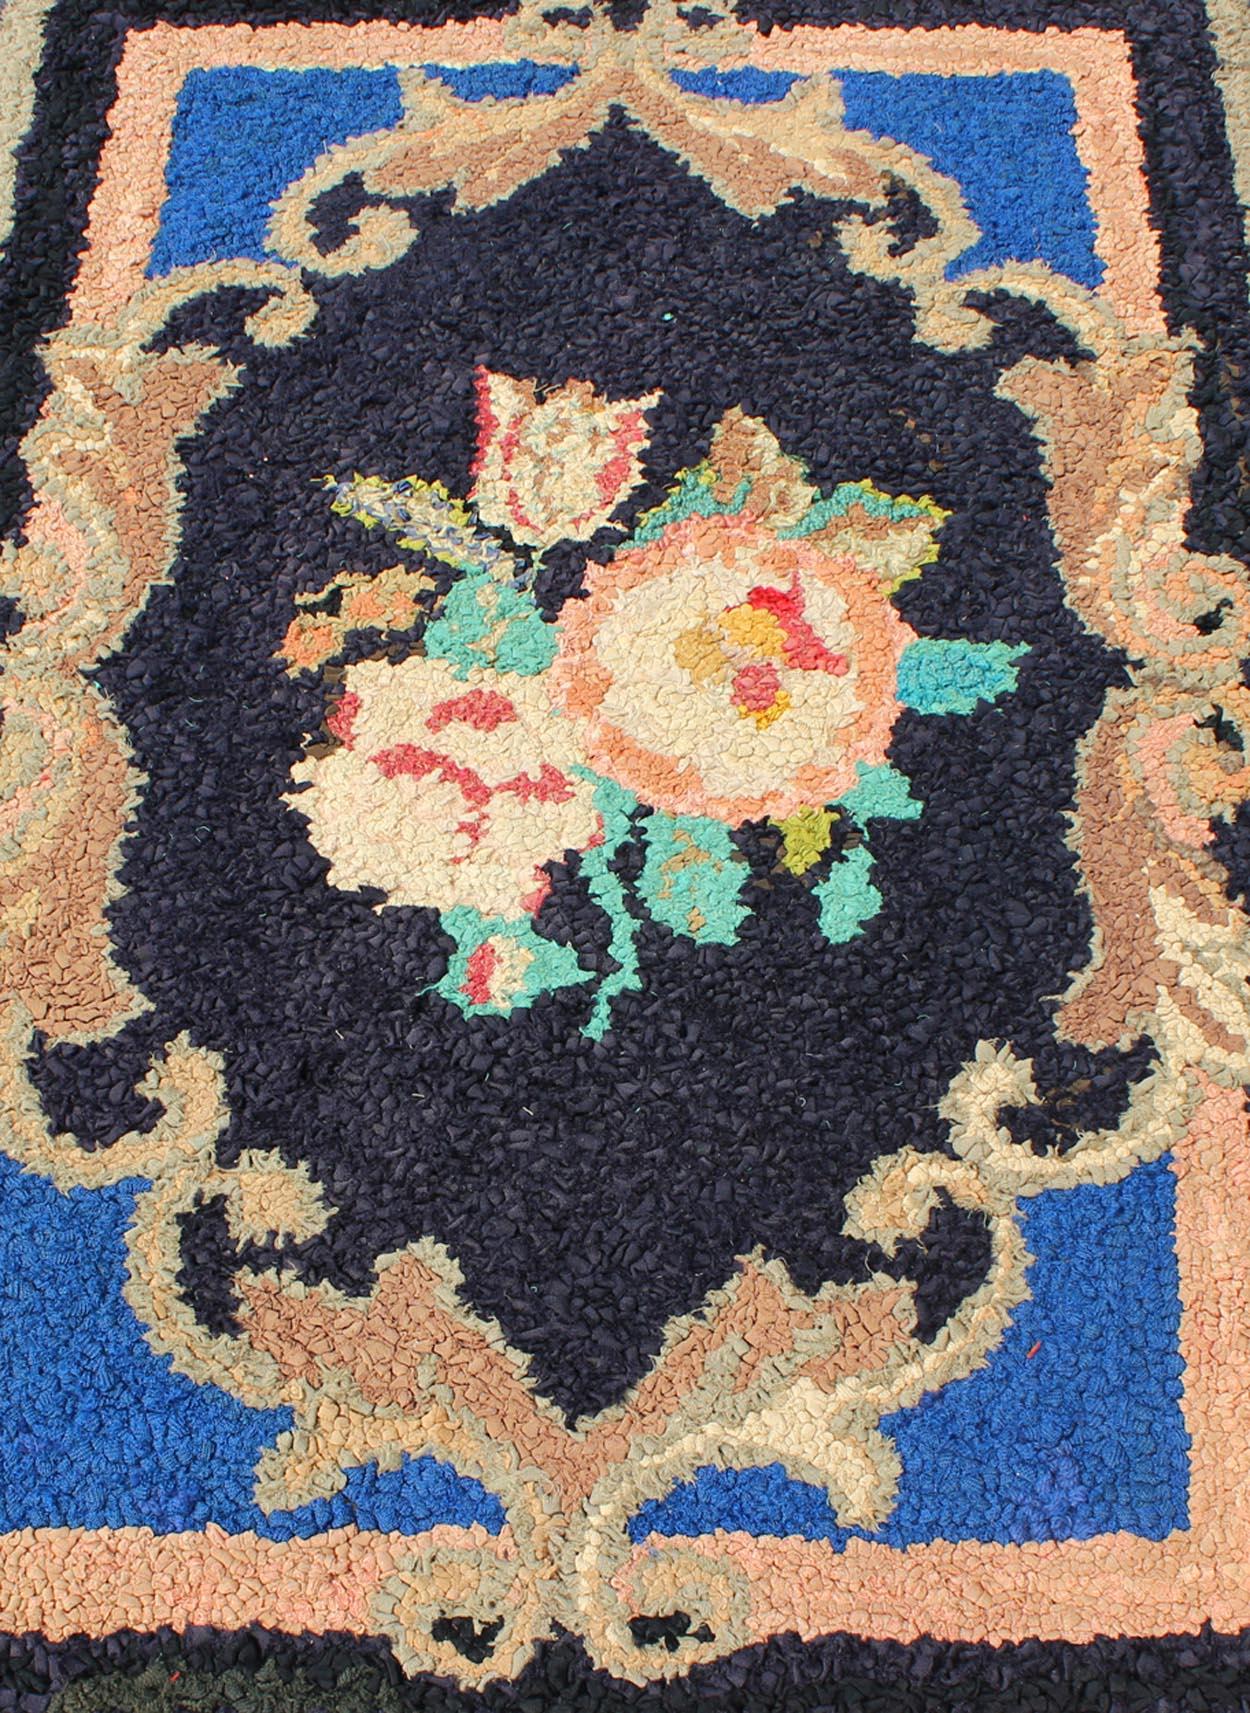 Antique American Hooked Rug with Large Floral Medallion in Black Background In Excellent Condition For Sale In Atlanta, GA